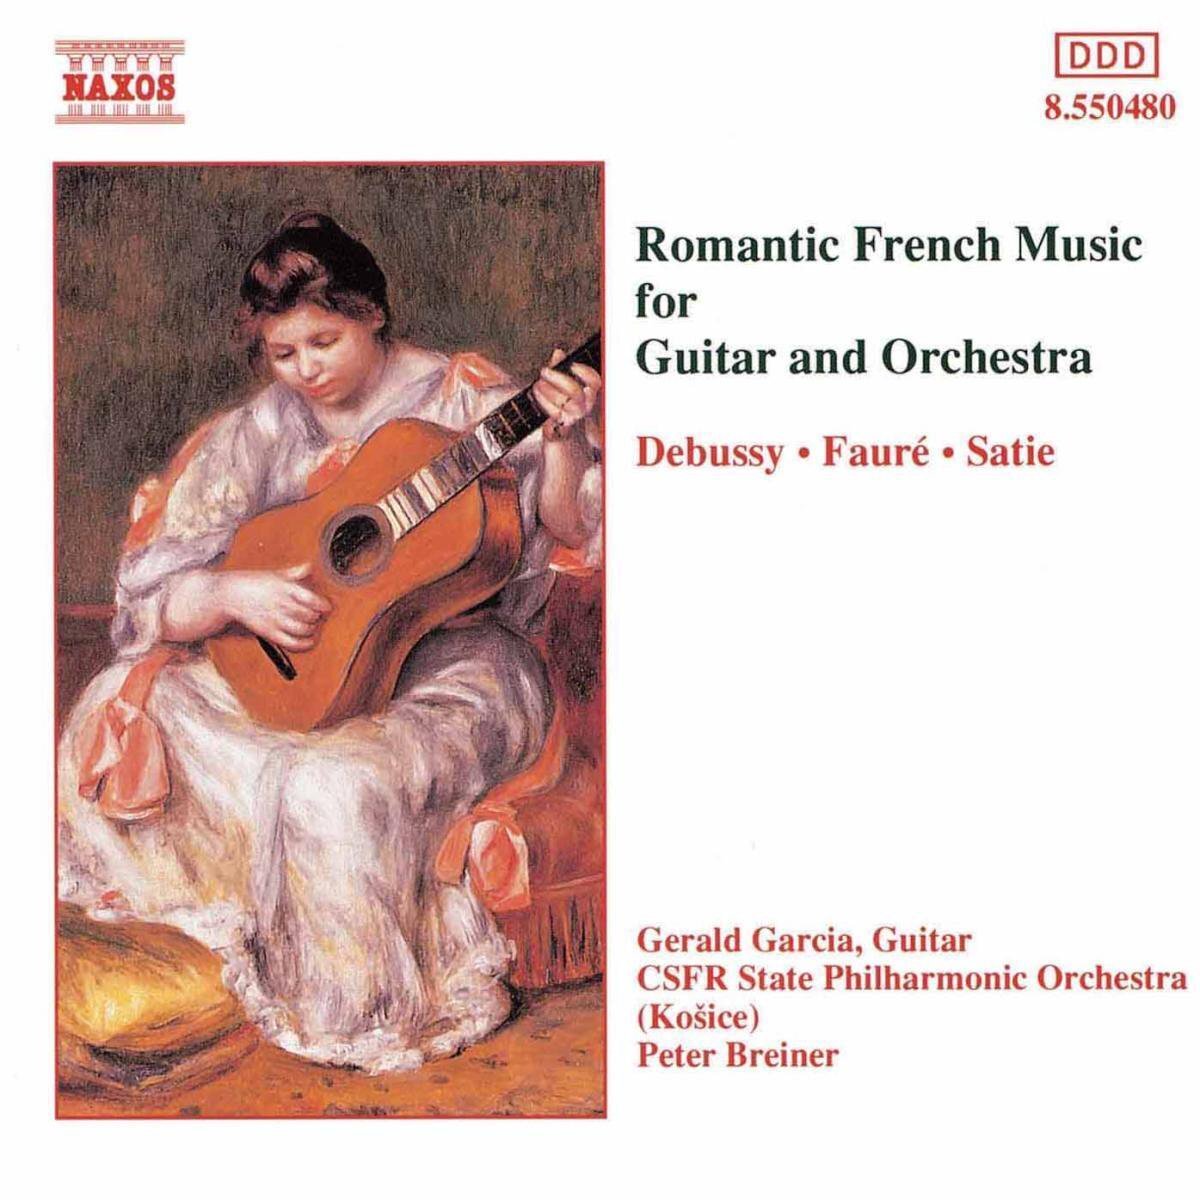 OUTHERE Debussy Claude Achille: Romantic French Music For Guitar And Orchestra Musica Francese Romantica Chitarra Orchestra